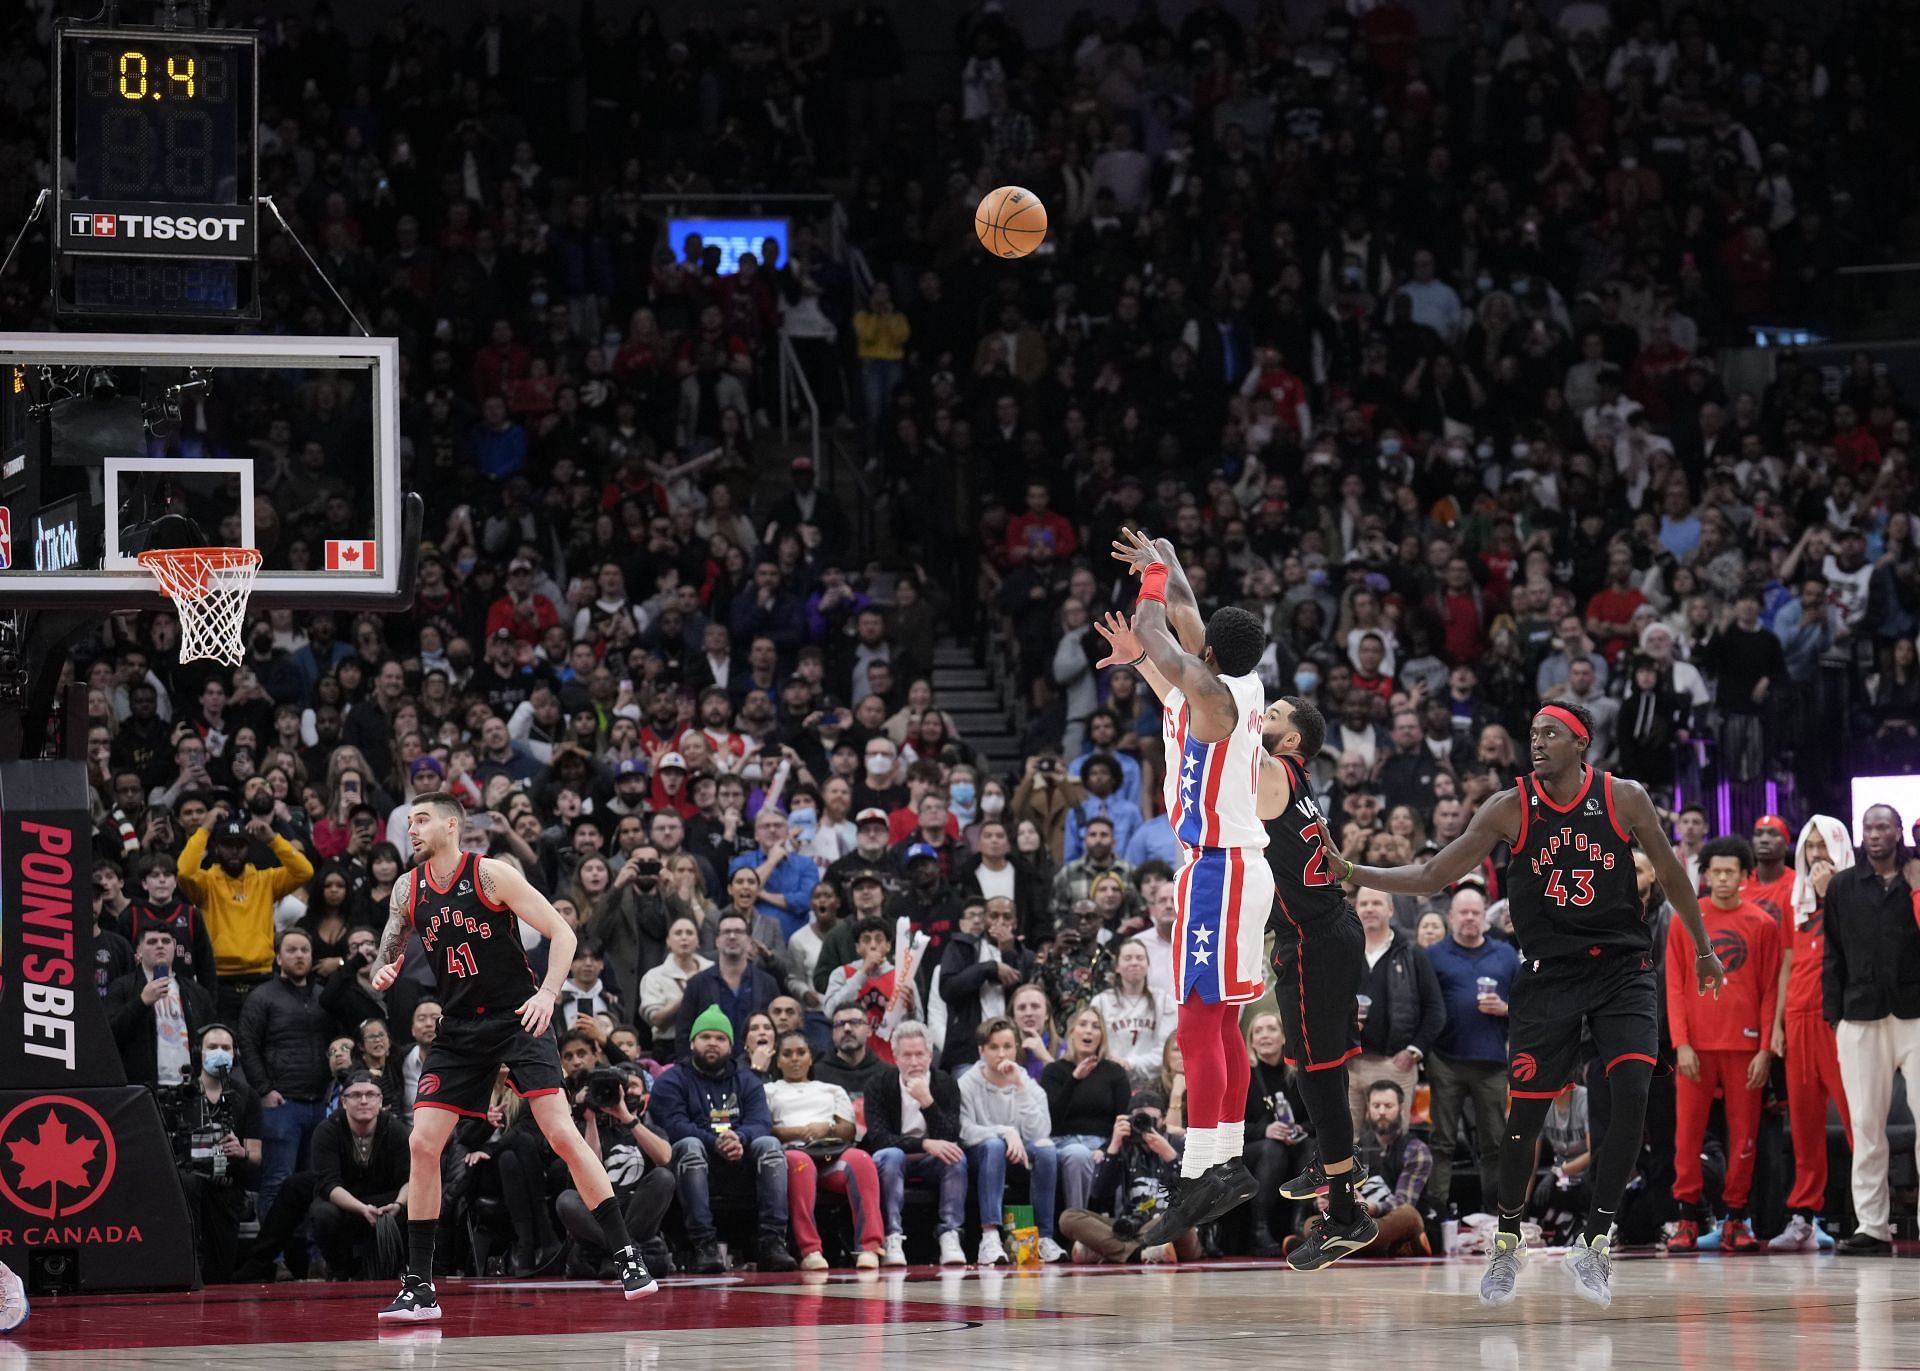 Kyrie Irving takes a shot against the Toronto Raptors.